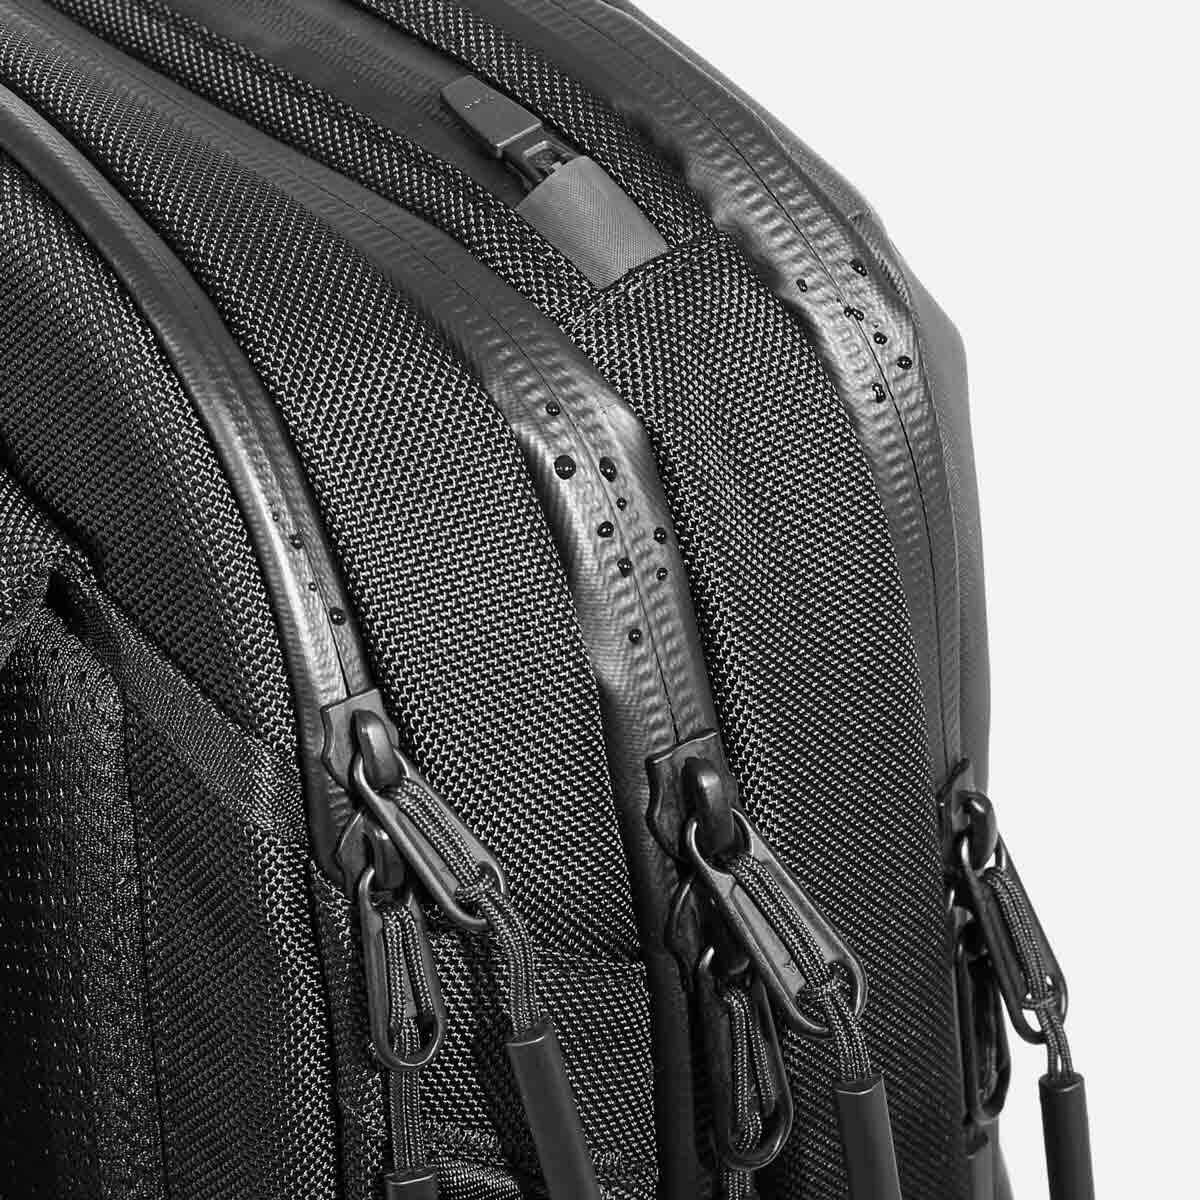 Tech Pack 2 - Black — Aer | Modern gym bags, travel backpacks and